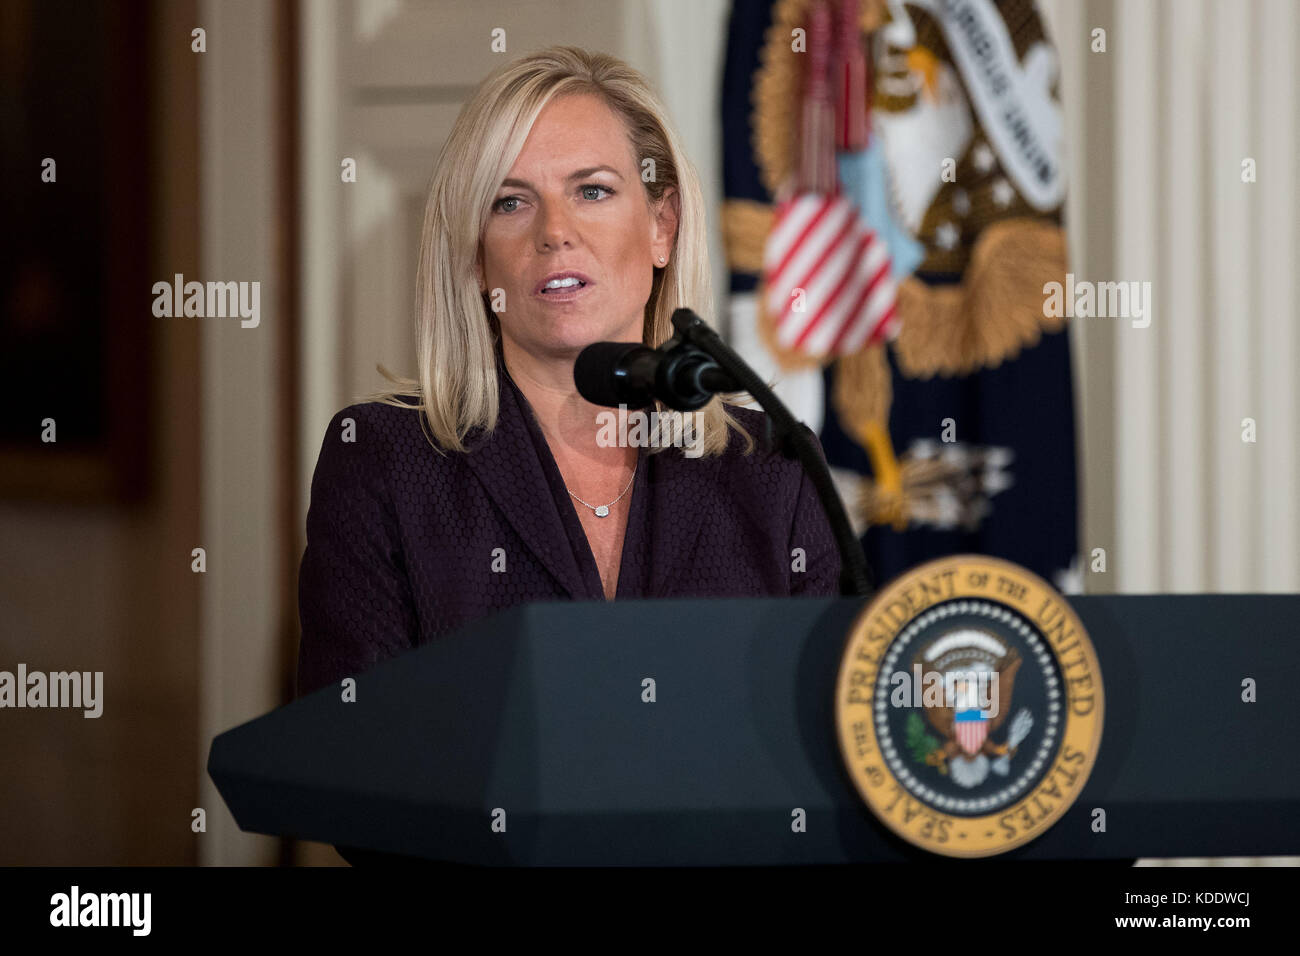 Washington, USA. 12th Oct, 2017. Kirstjen Nielsen speaks during her nomination announcement at the White House in Washington, DC, the United States, on Oct. 12, 2017. U.S. President Donald Trump on Wednesday nominated Kirstjen Nielsen, an aide to White House Chief of Staff John Kelly, to be Secretary of Homeland Security. Credit: Ting Shen/Xinhua/Alamy Live News Stock Photo